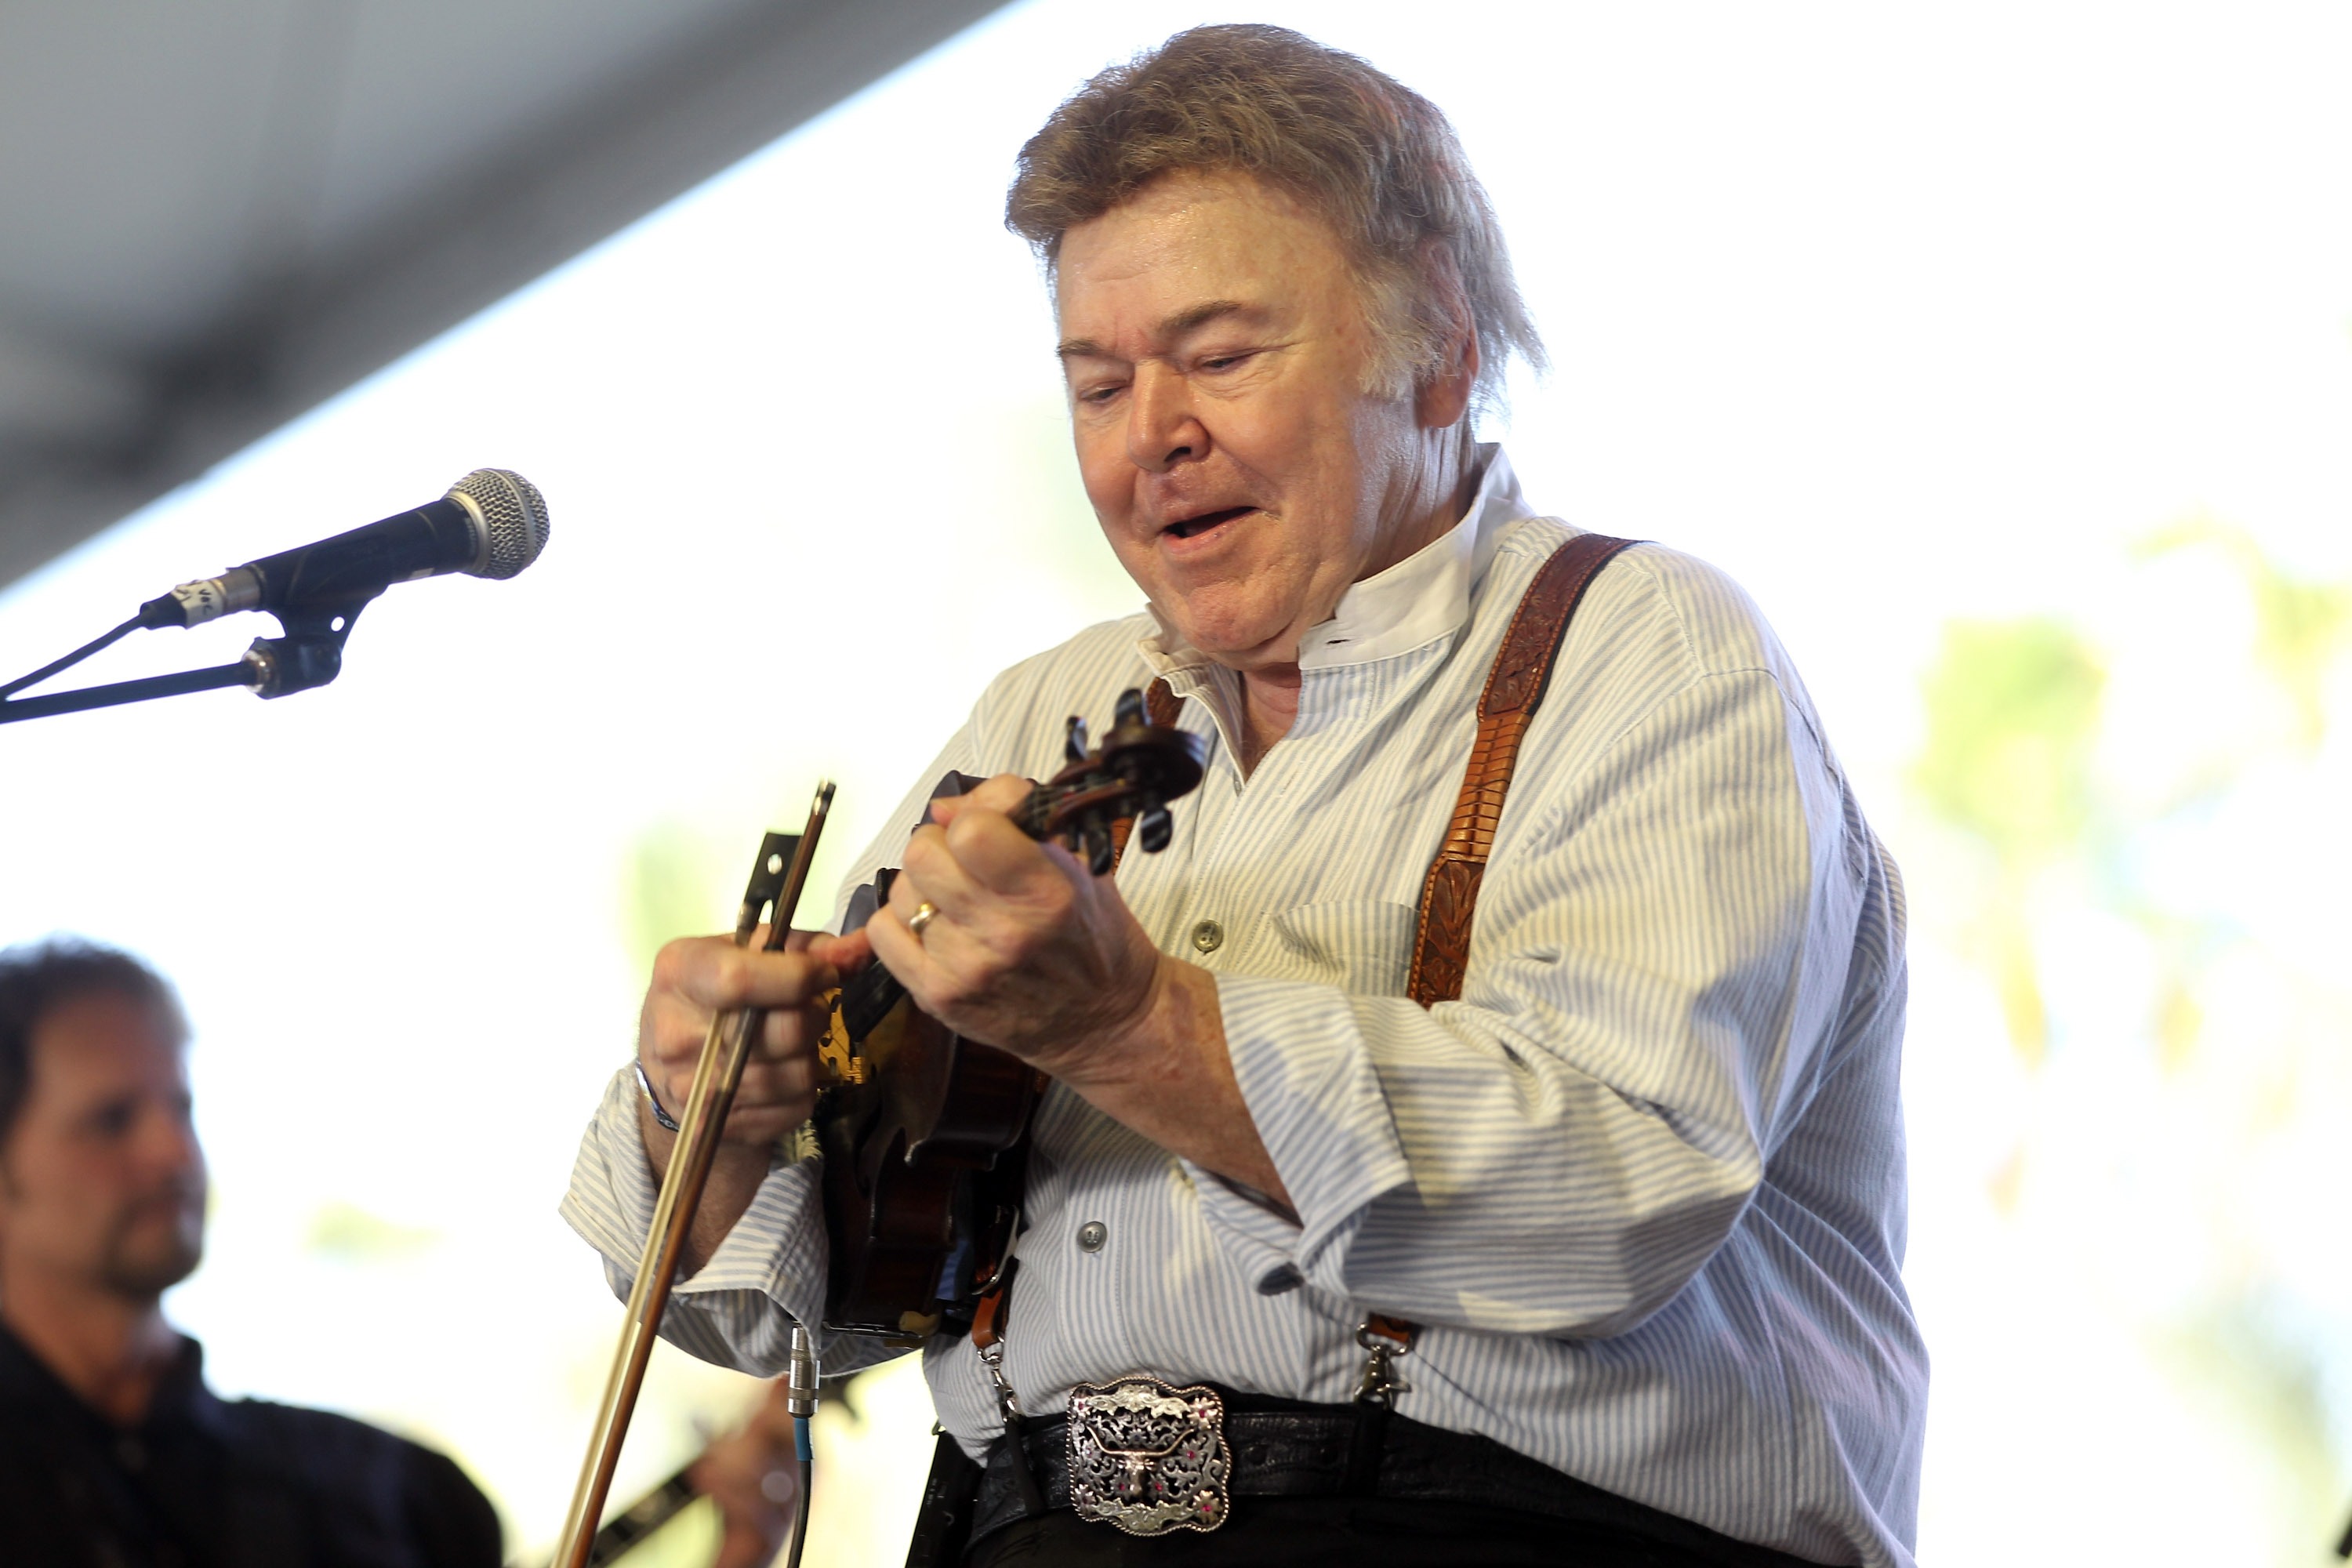 Musician Roy Clark performs onstage during the Stagecoach Country Music Festival held at the Empire Polo Field on April 29, 2012 in Indio, California. (Photo by Karl Walter/Getty Images for Stagecoach)